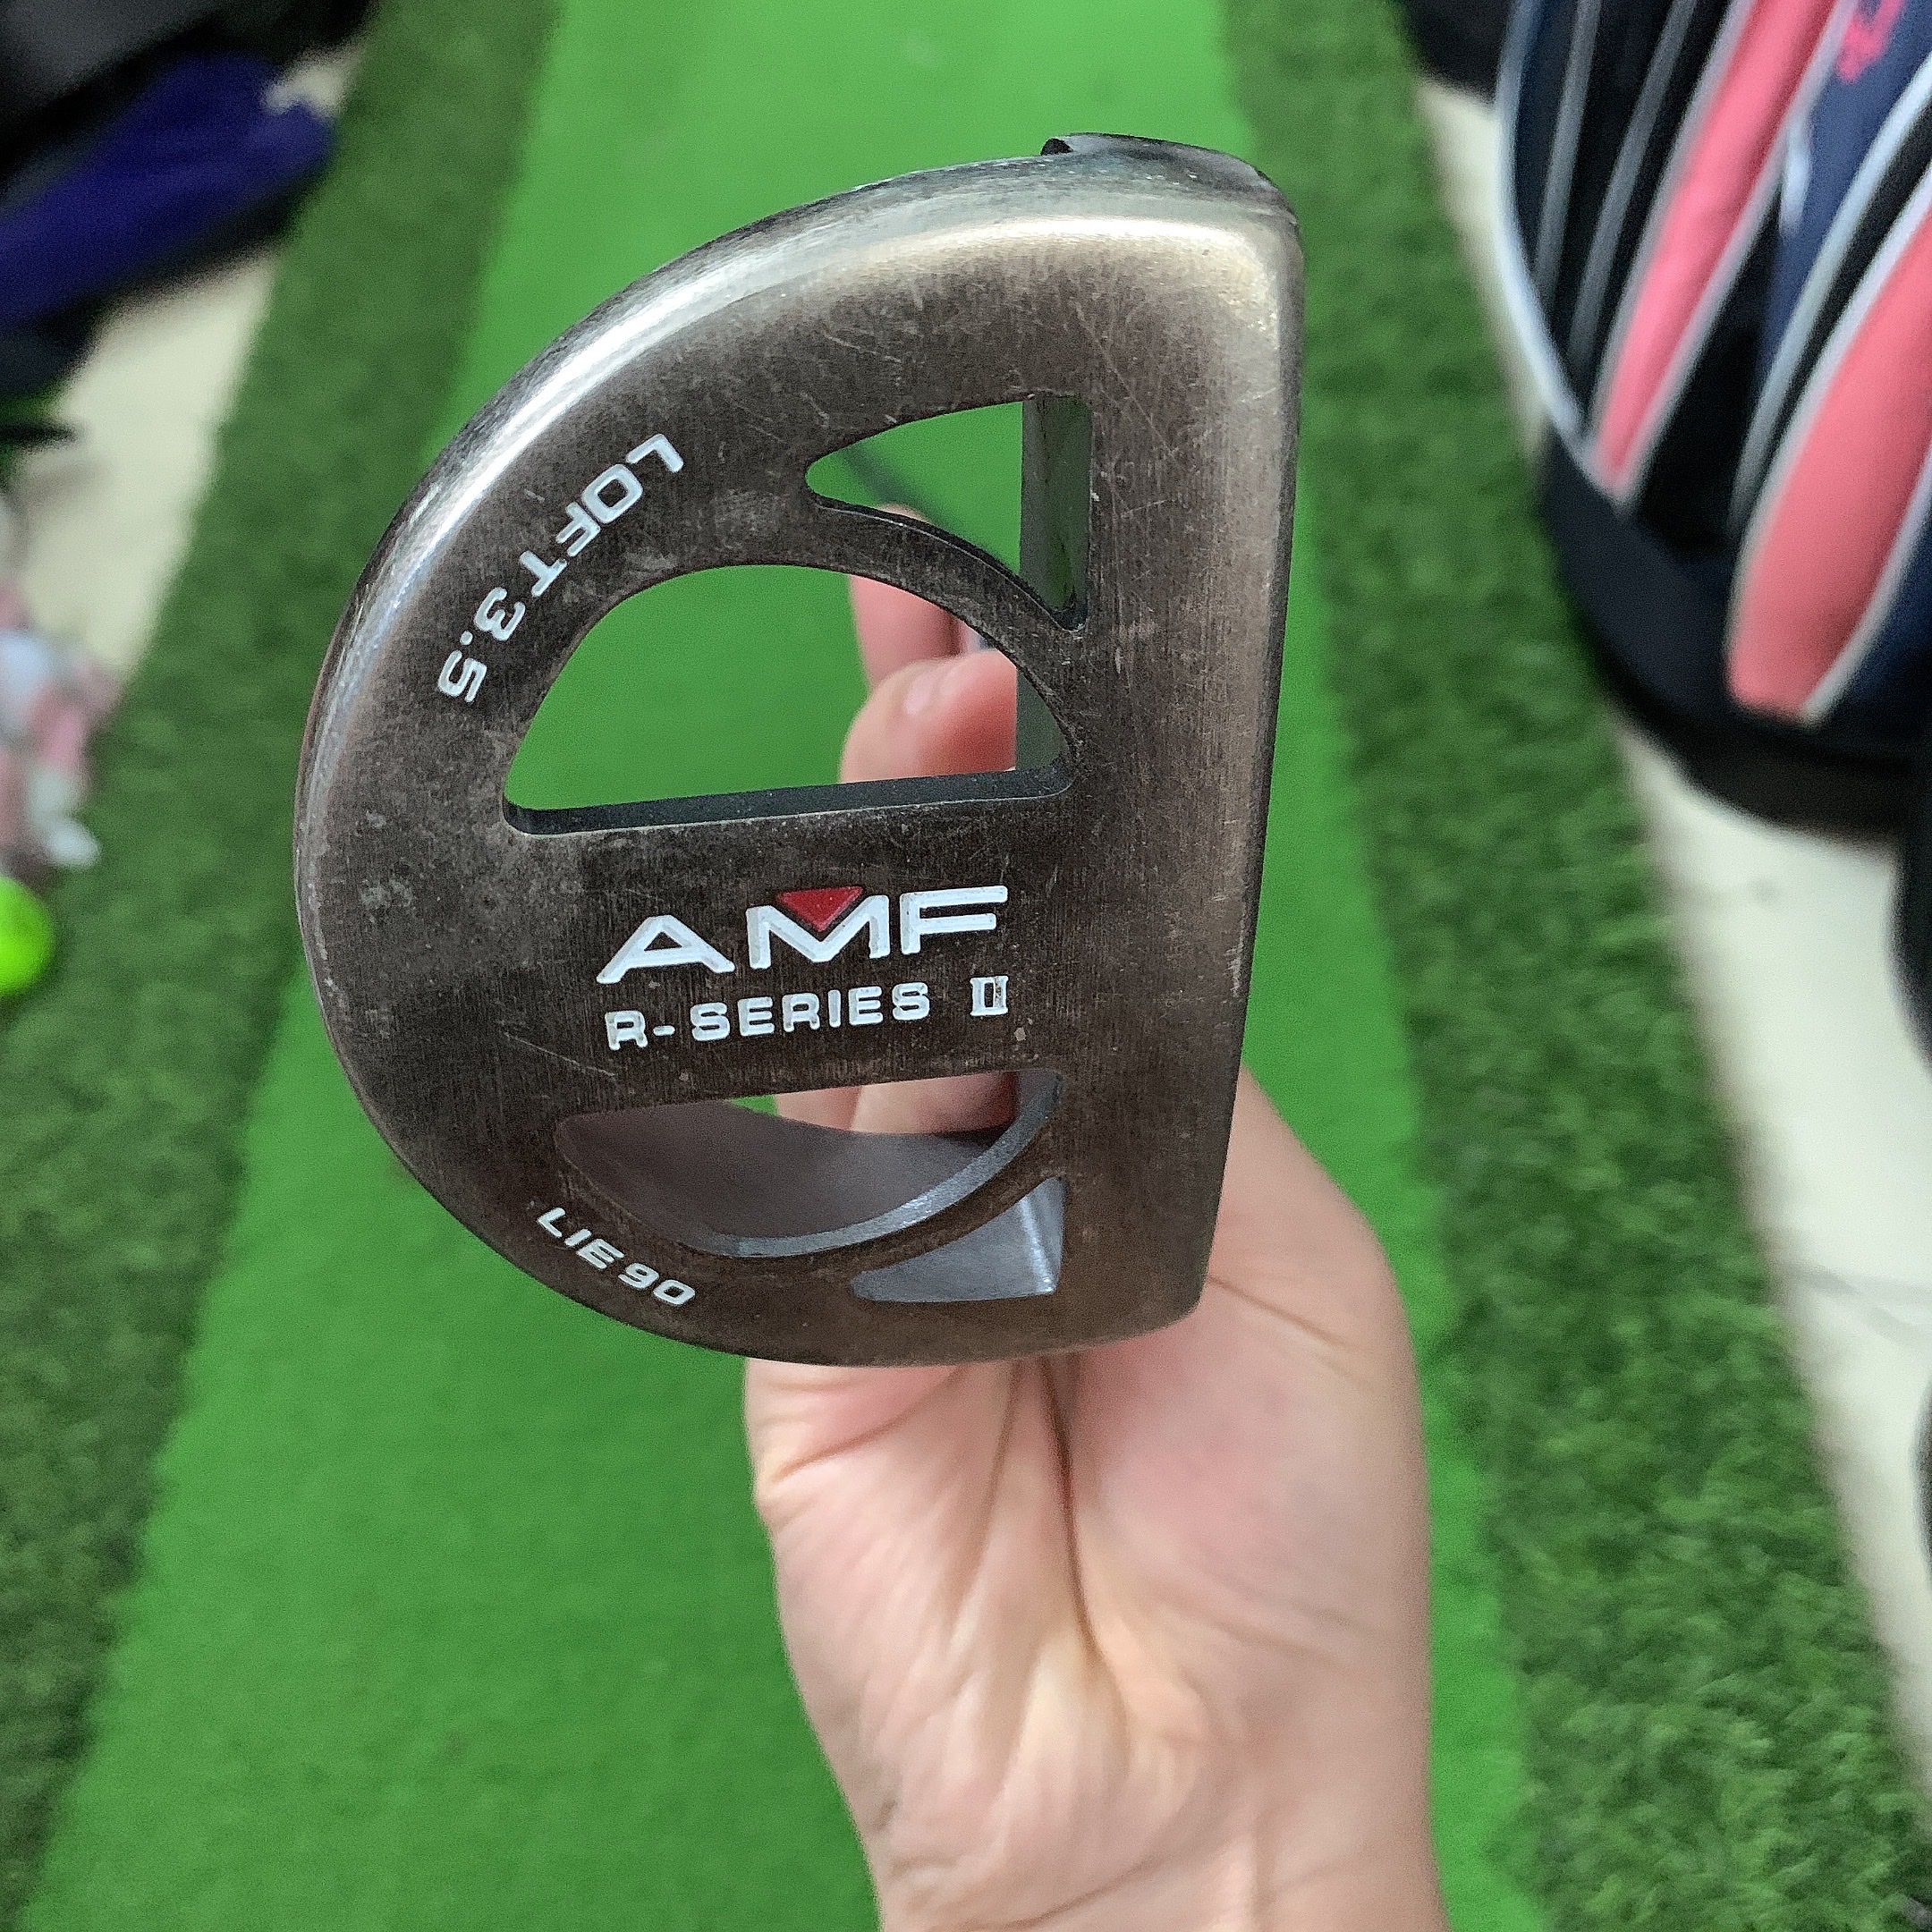 The right hand golf putter AMF-old golf putter